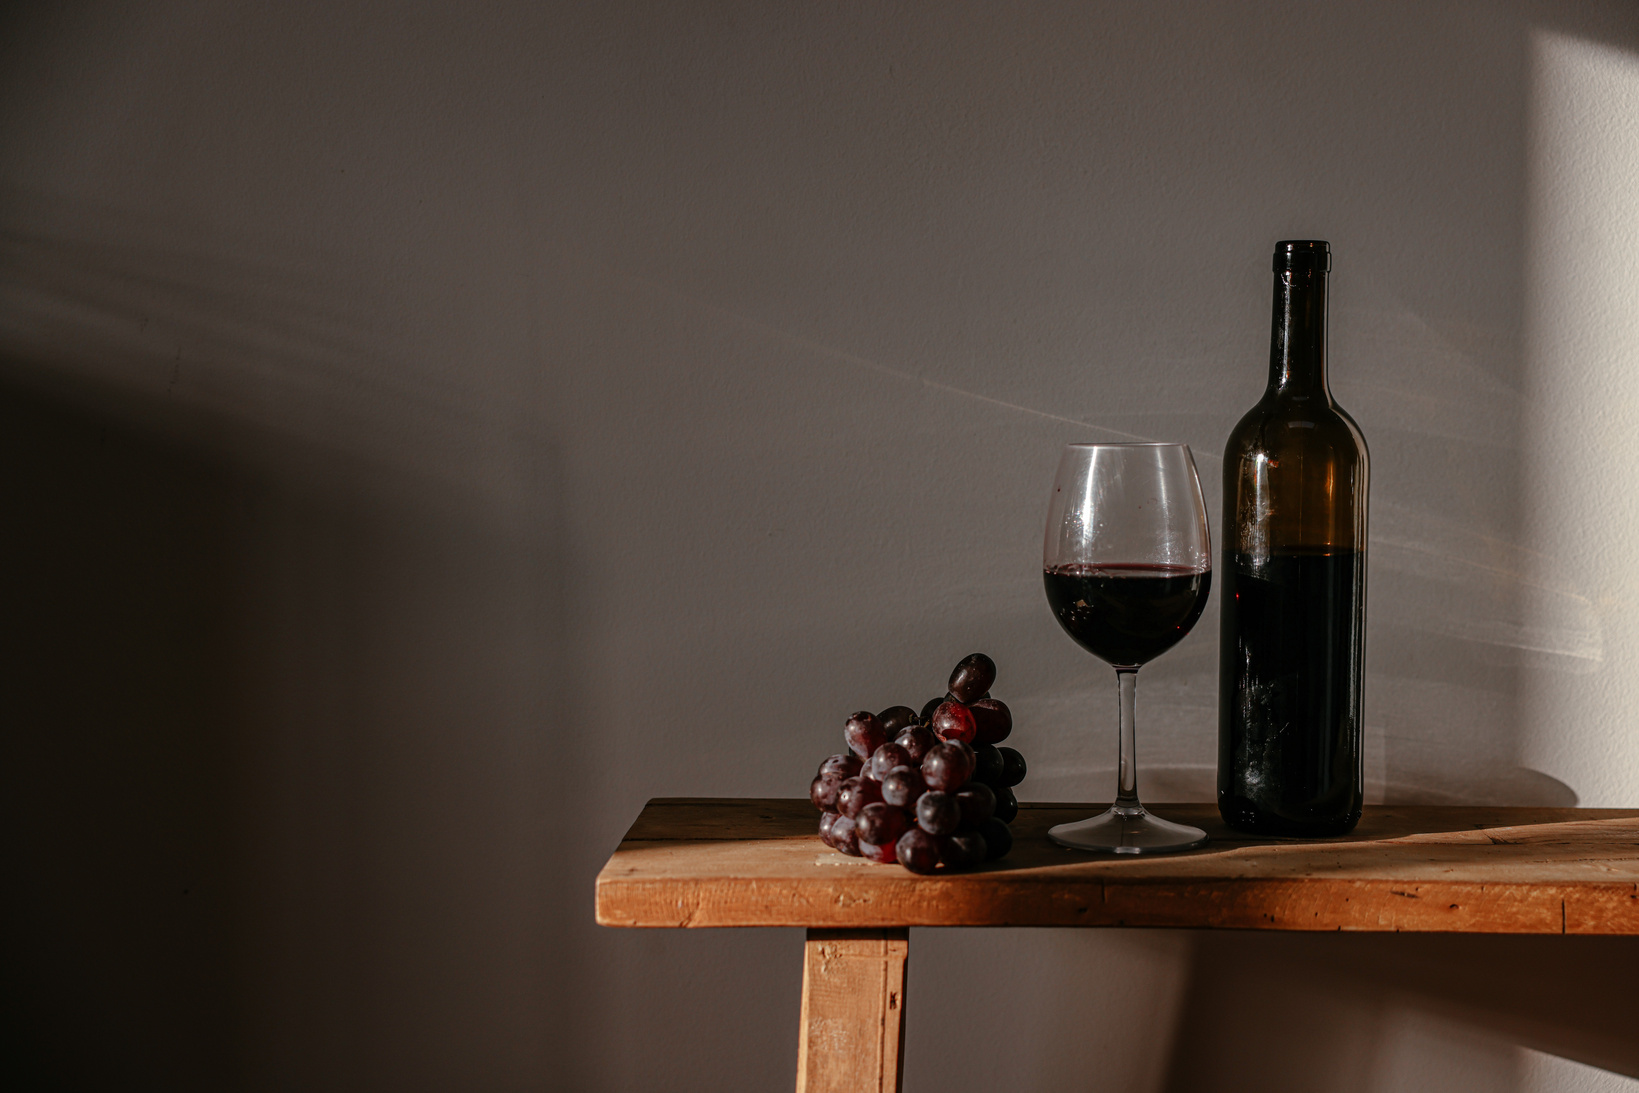  A Bottle and a Glass of Wine on a Wooden Bench